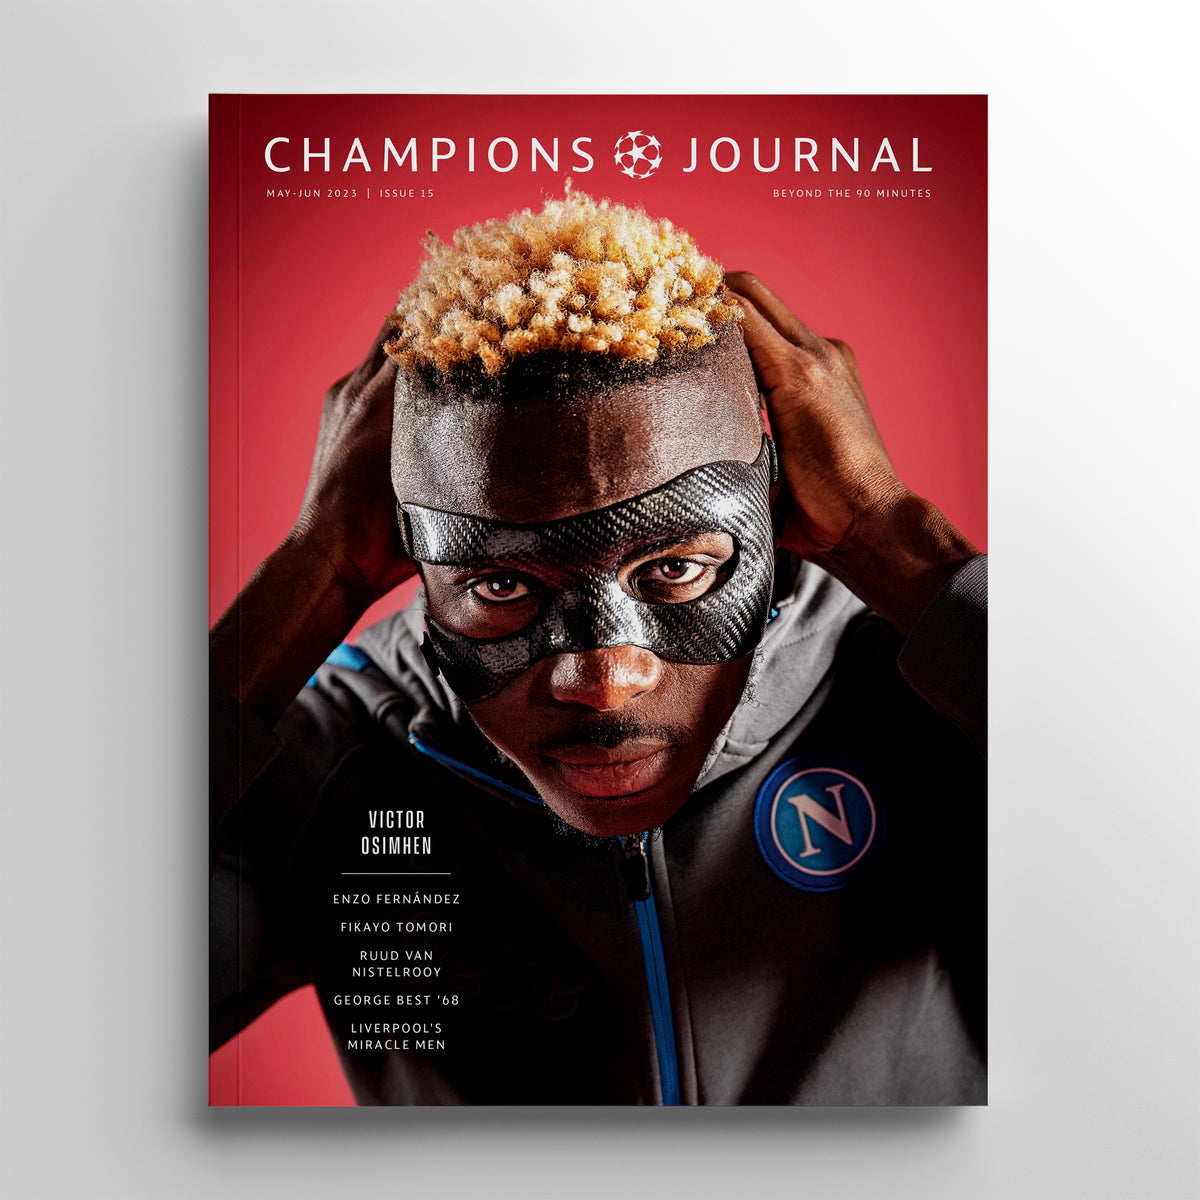 Champions Journal | Issue 15